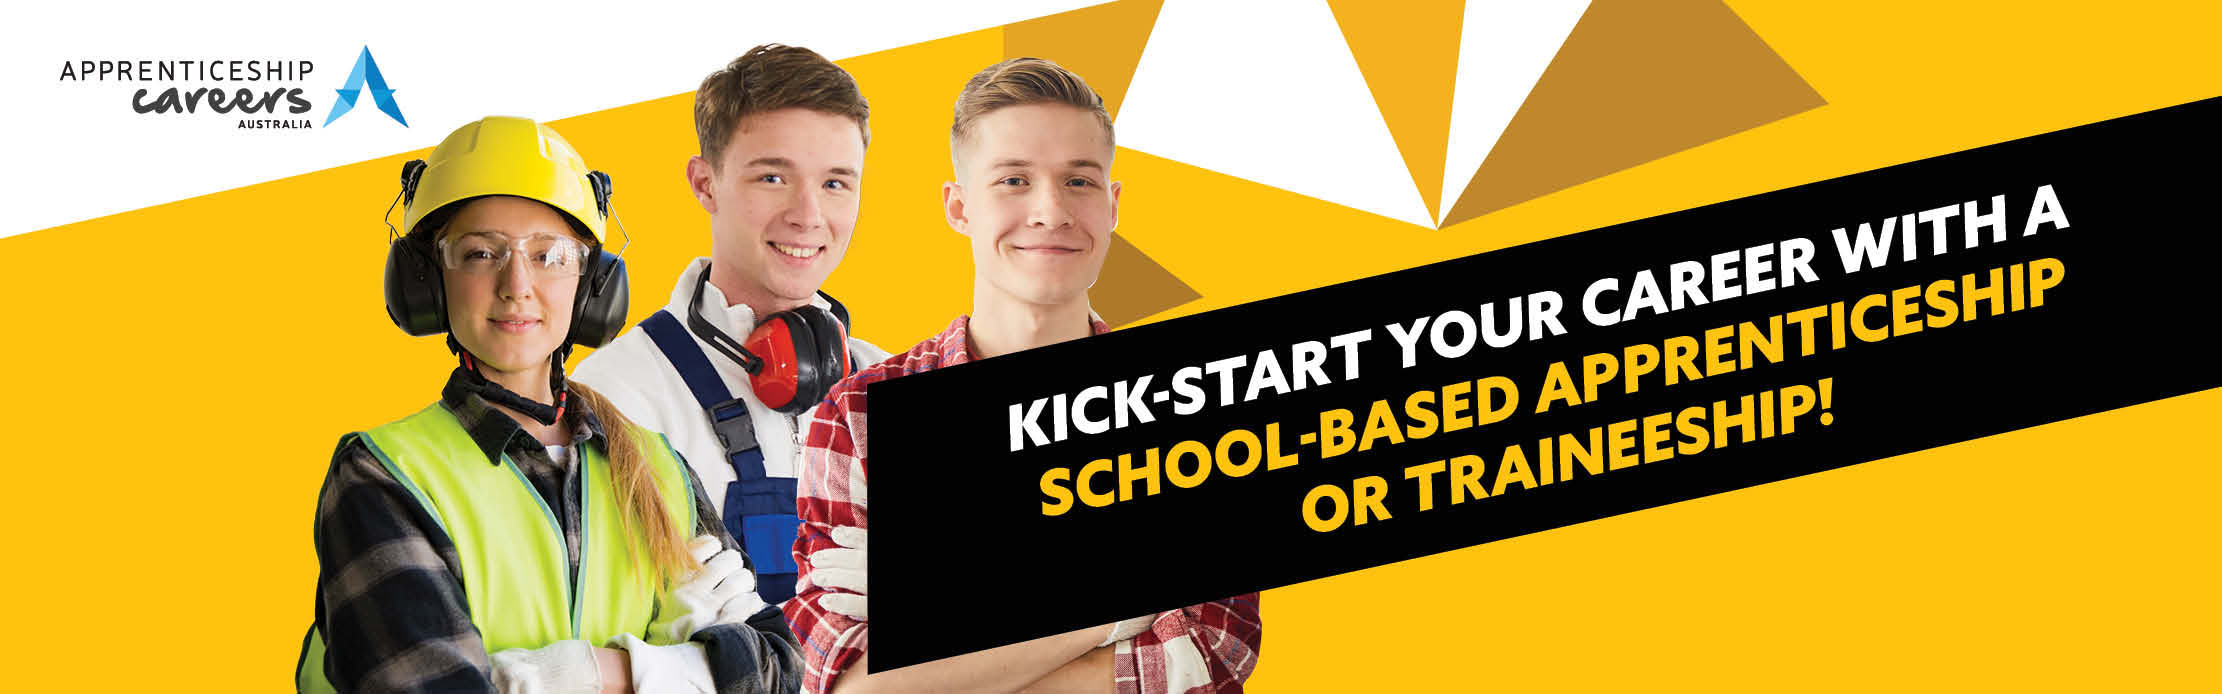 Kick-start your career with a school-based appreenticeship or traineeship